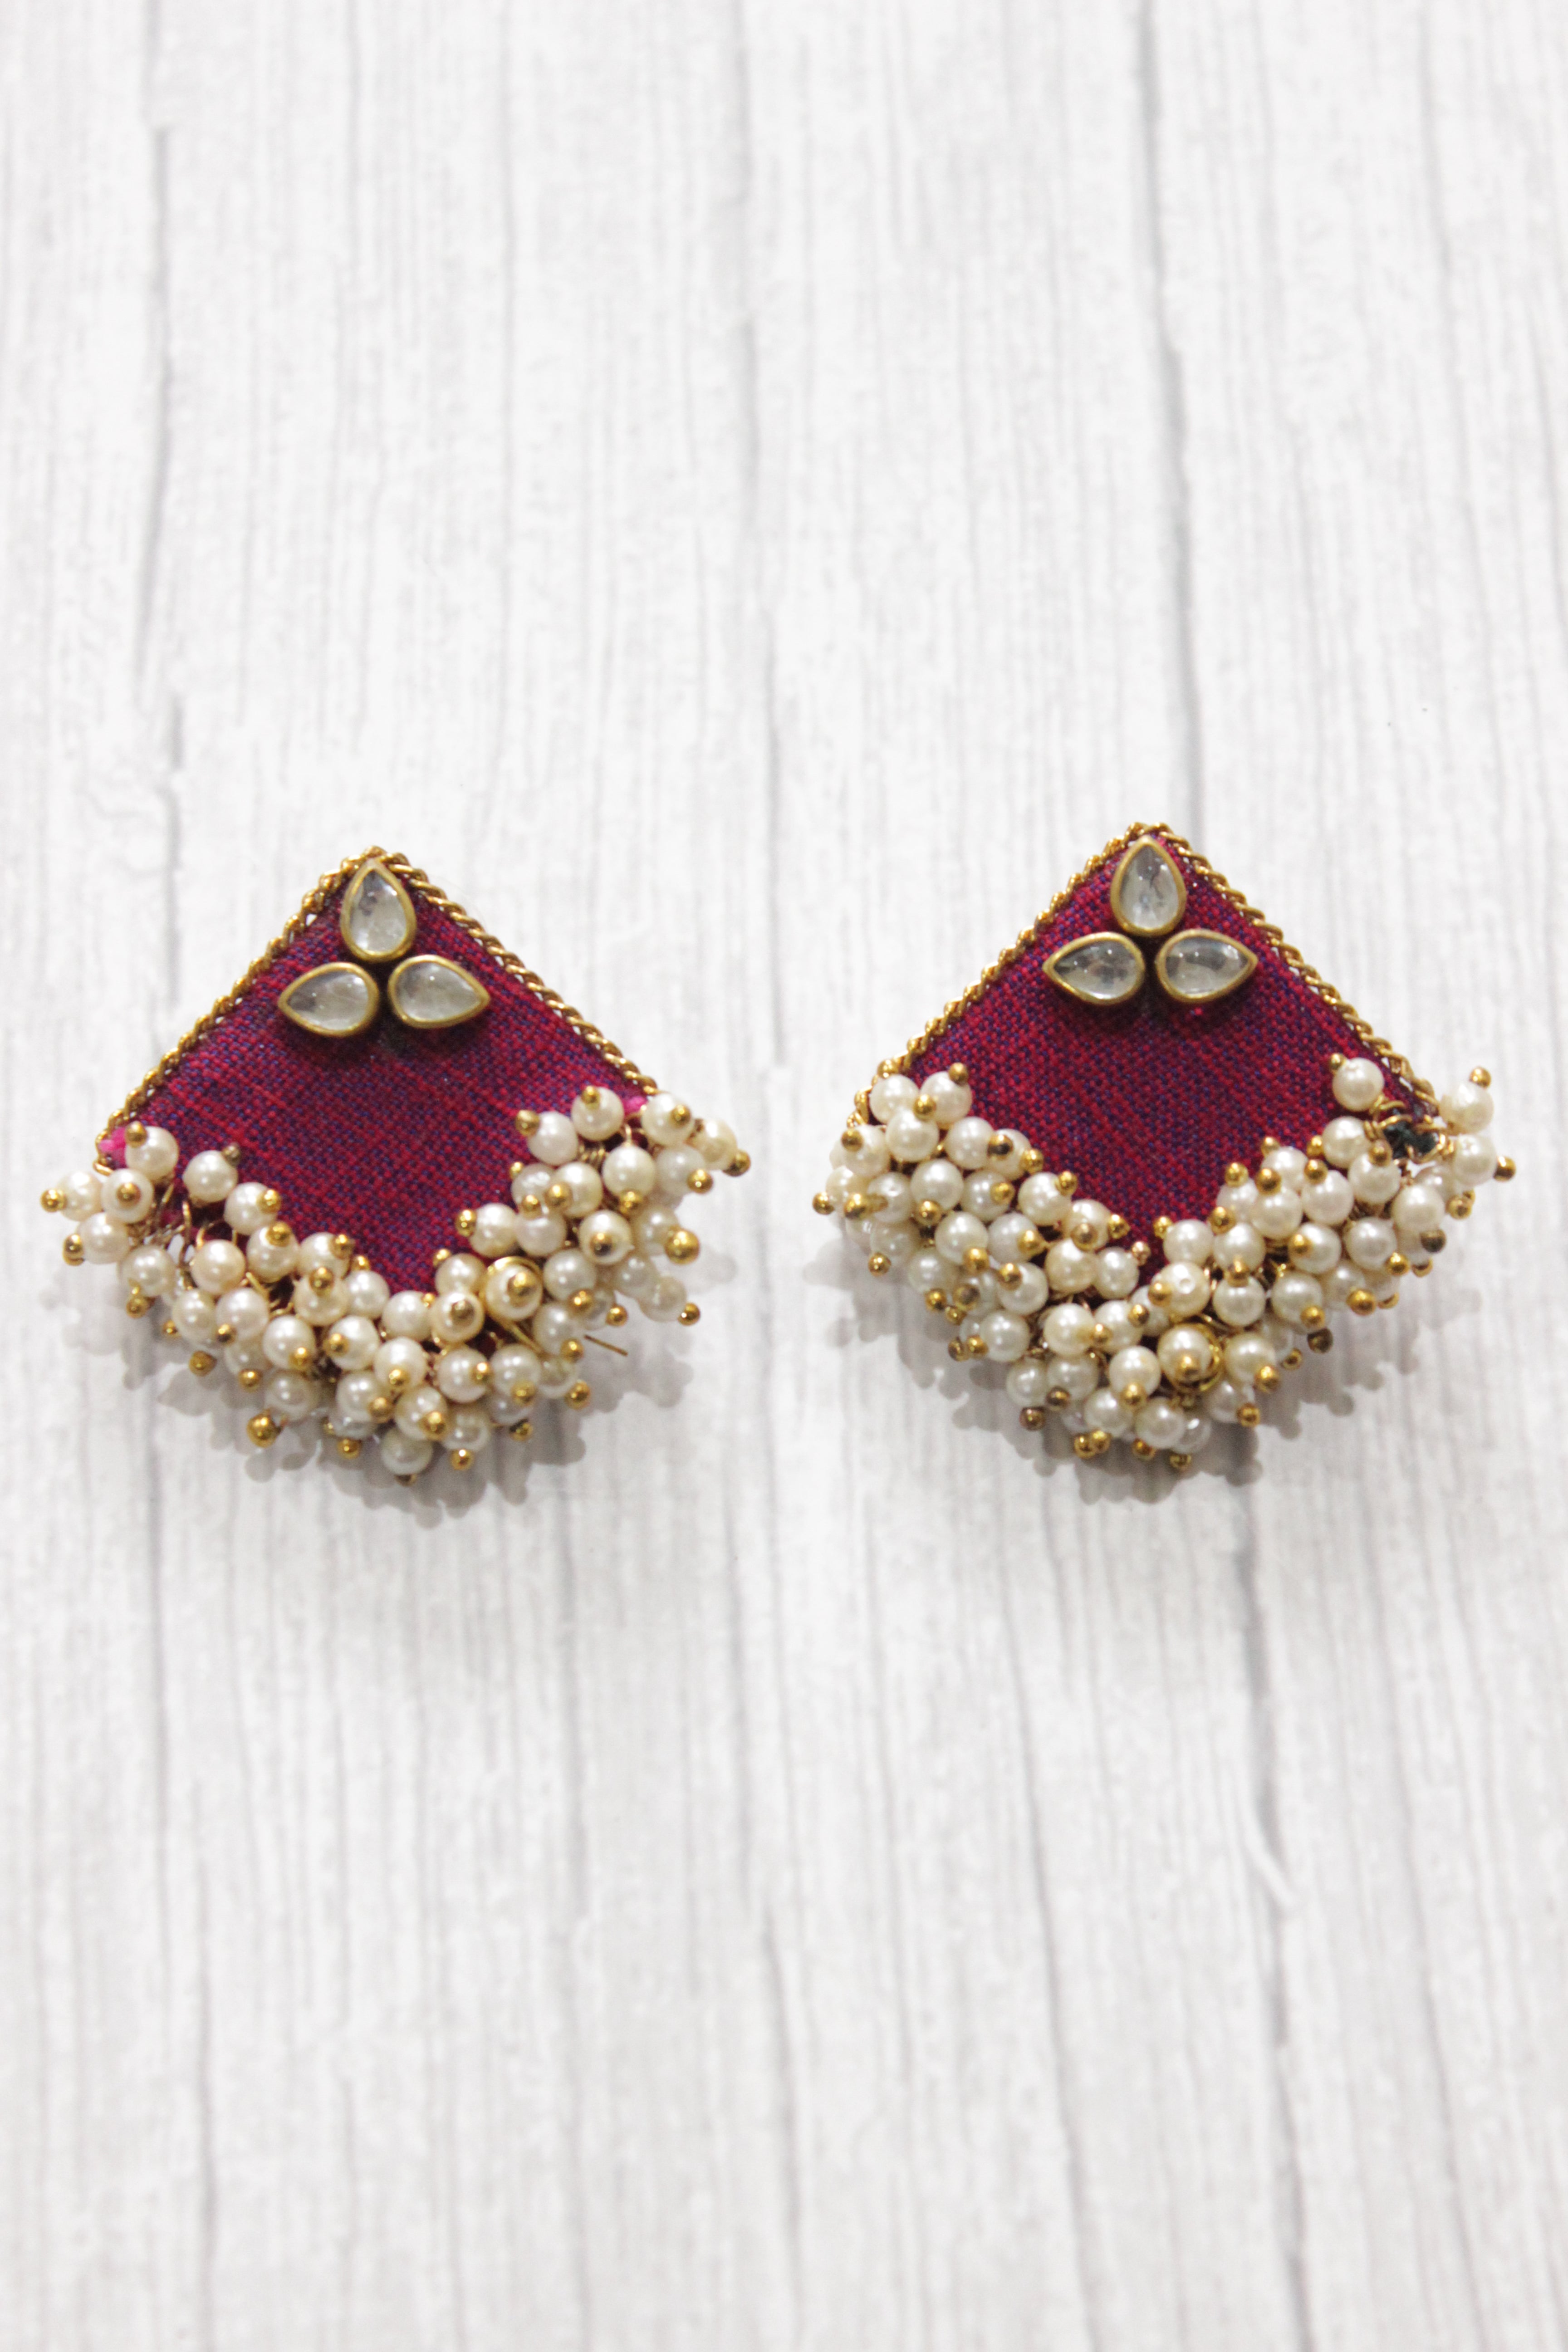 Ethnic Fuchsia Fabric Earrings Accentuated with Festive White Beads and Mirrors